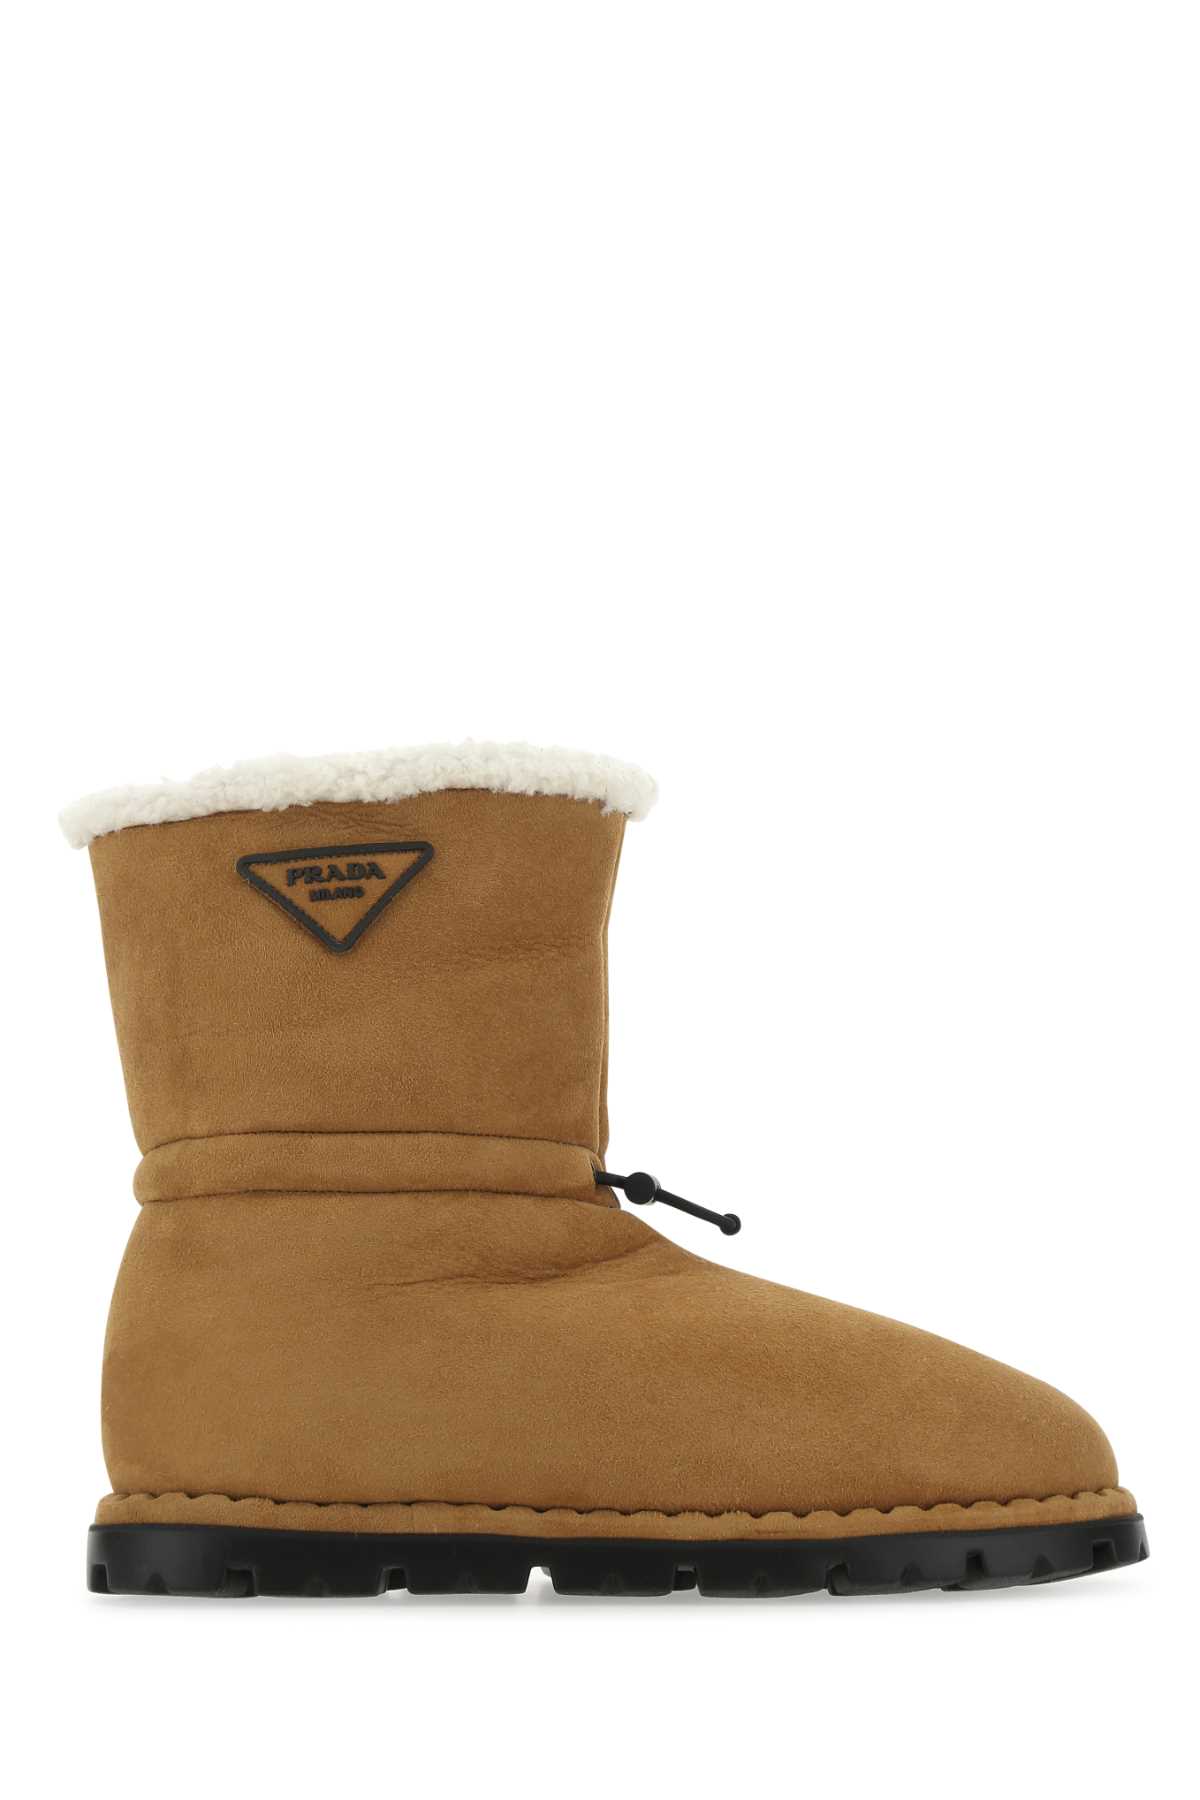 Prada Camel Shearling Ankle Boots